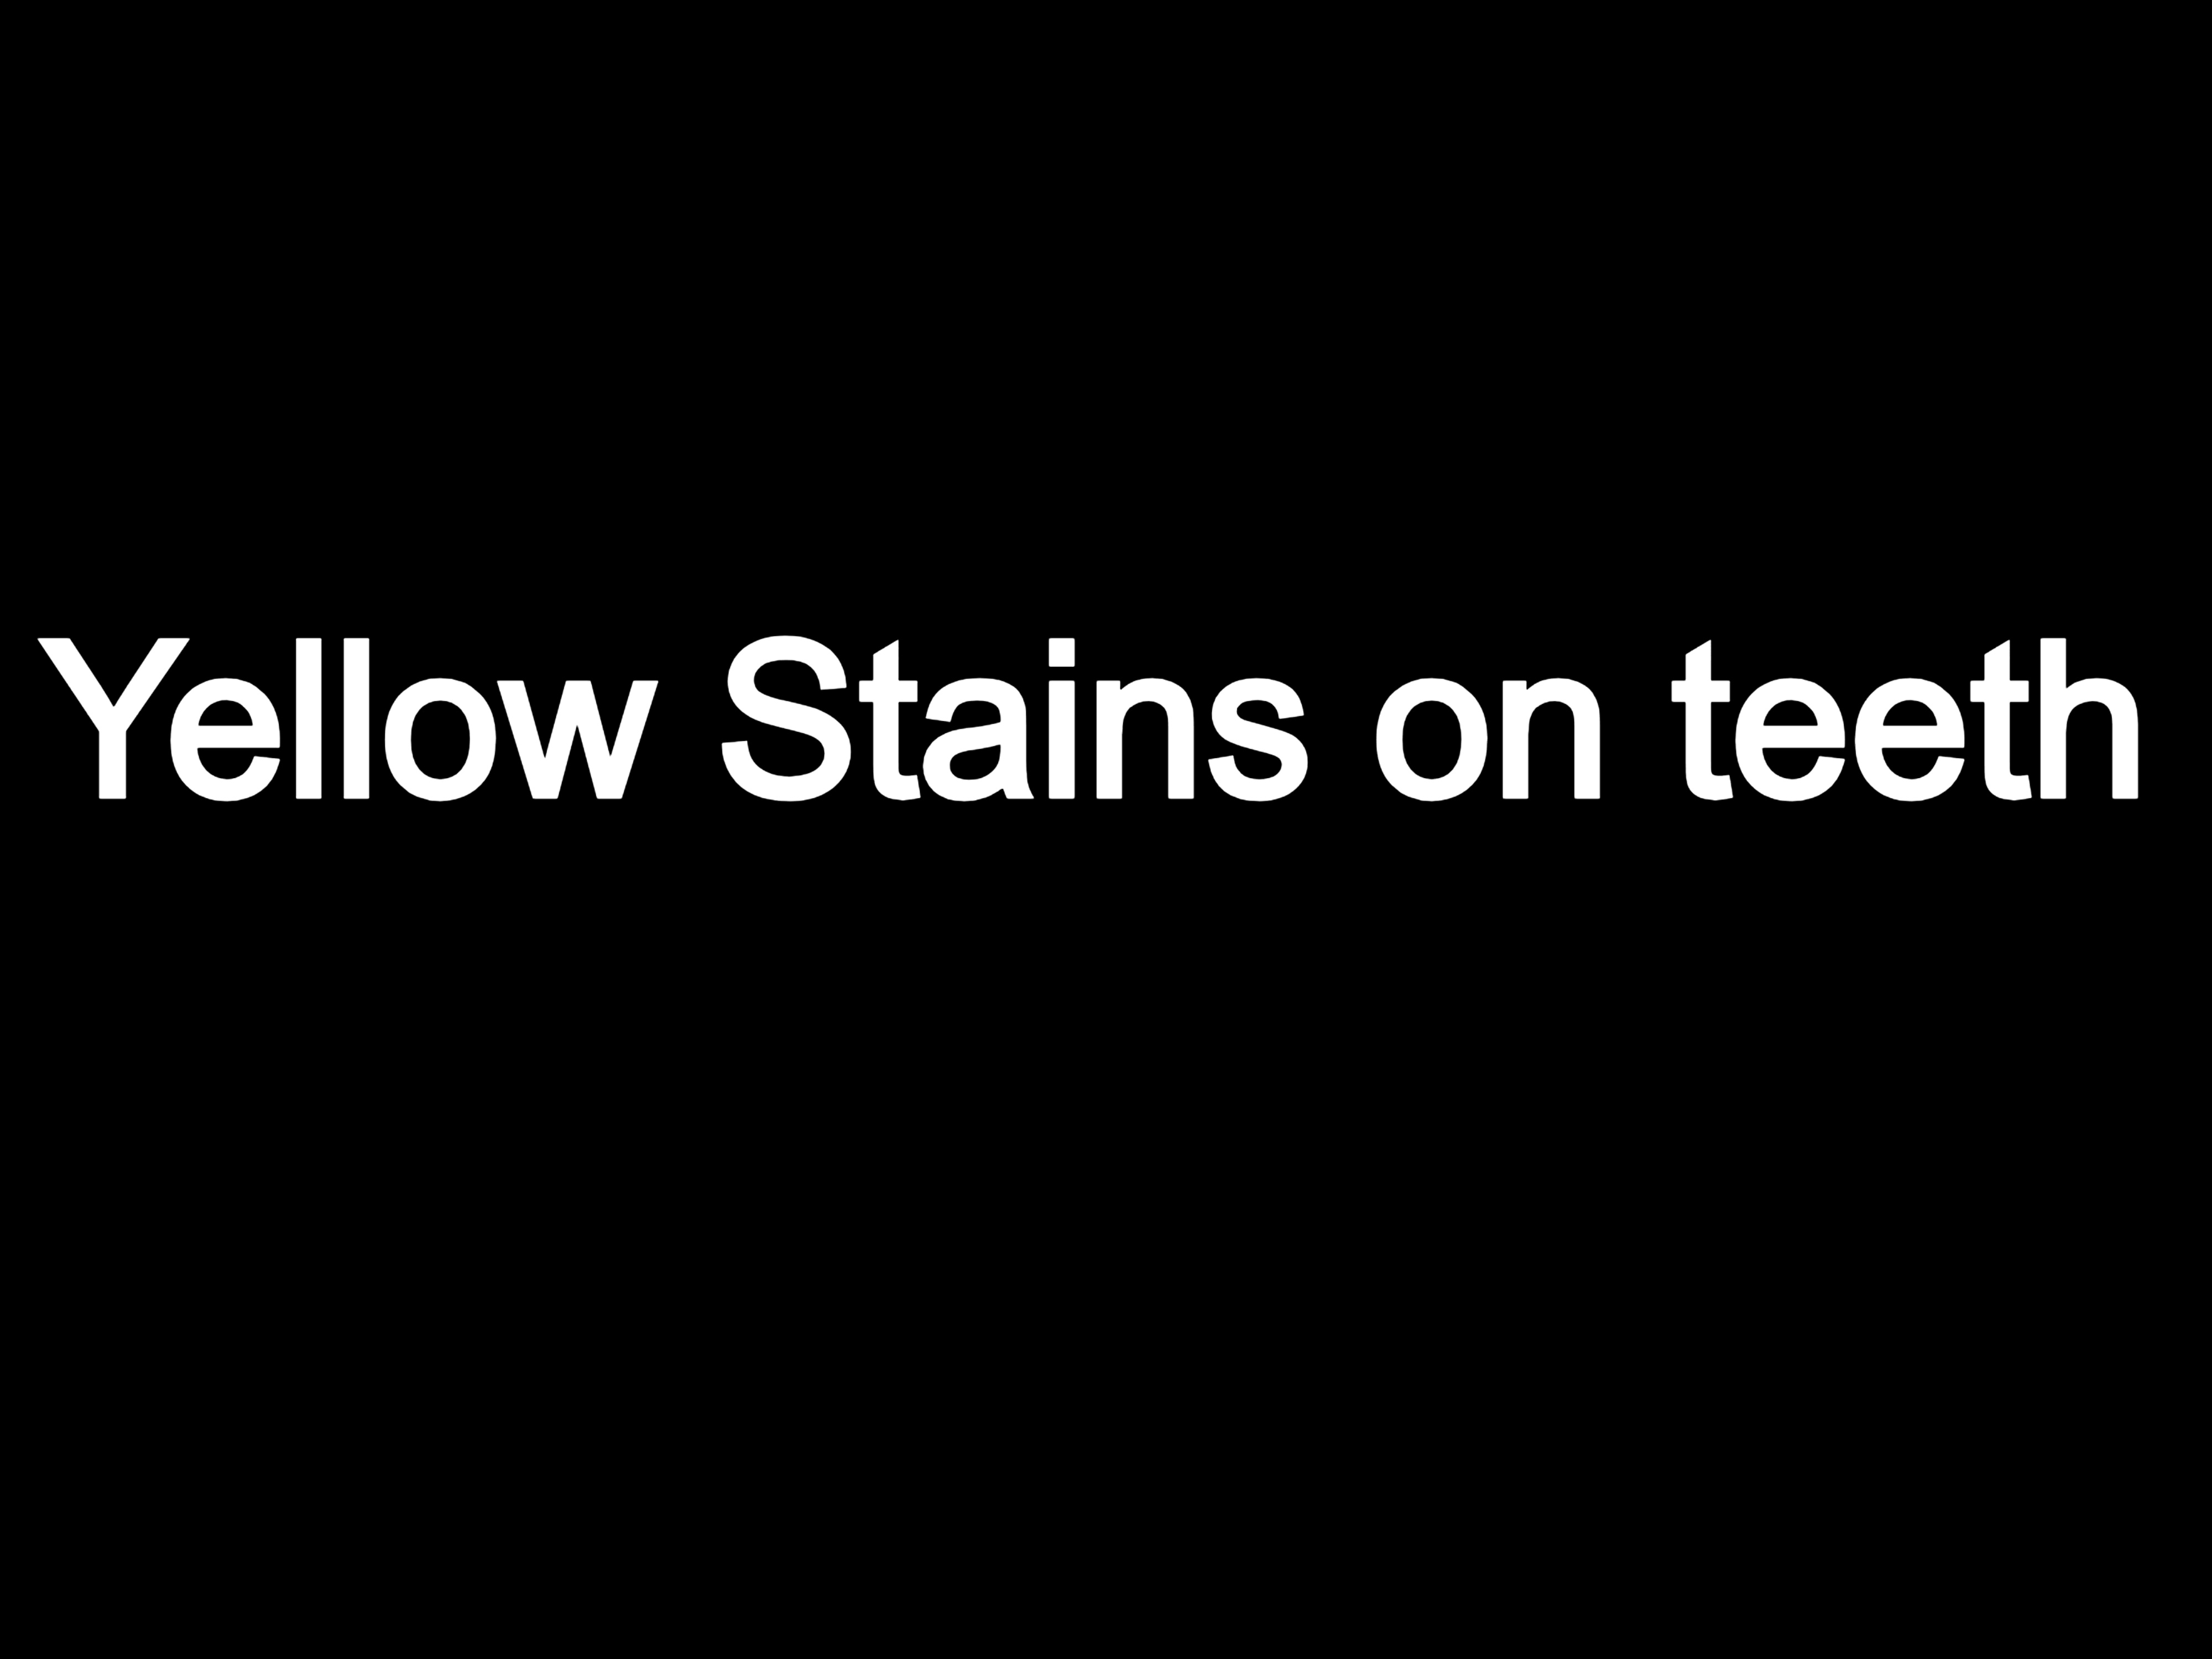 Yellow Stains on teeth